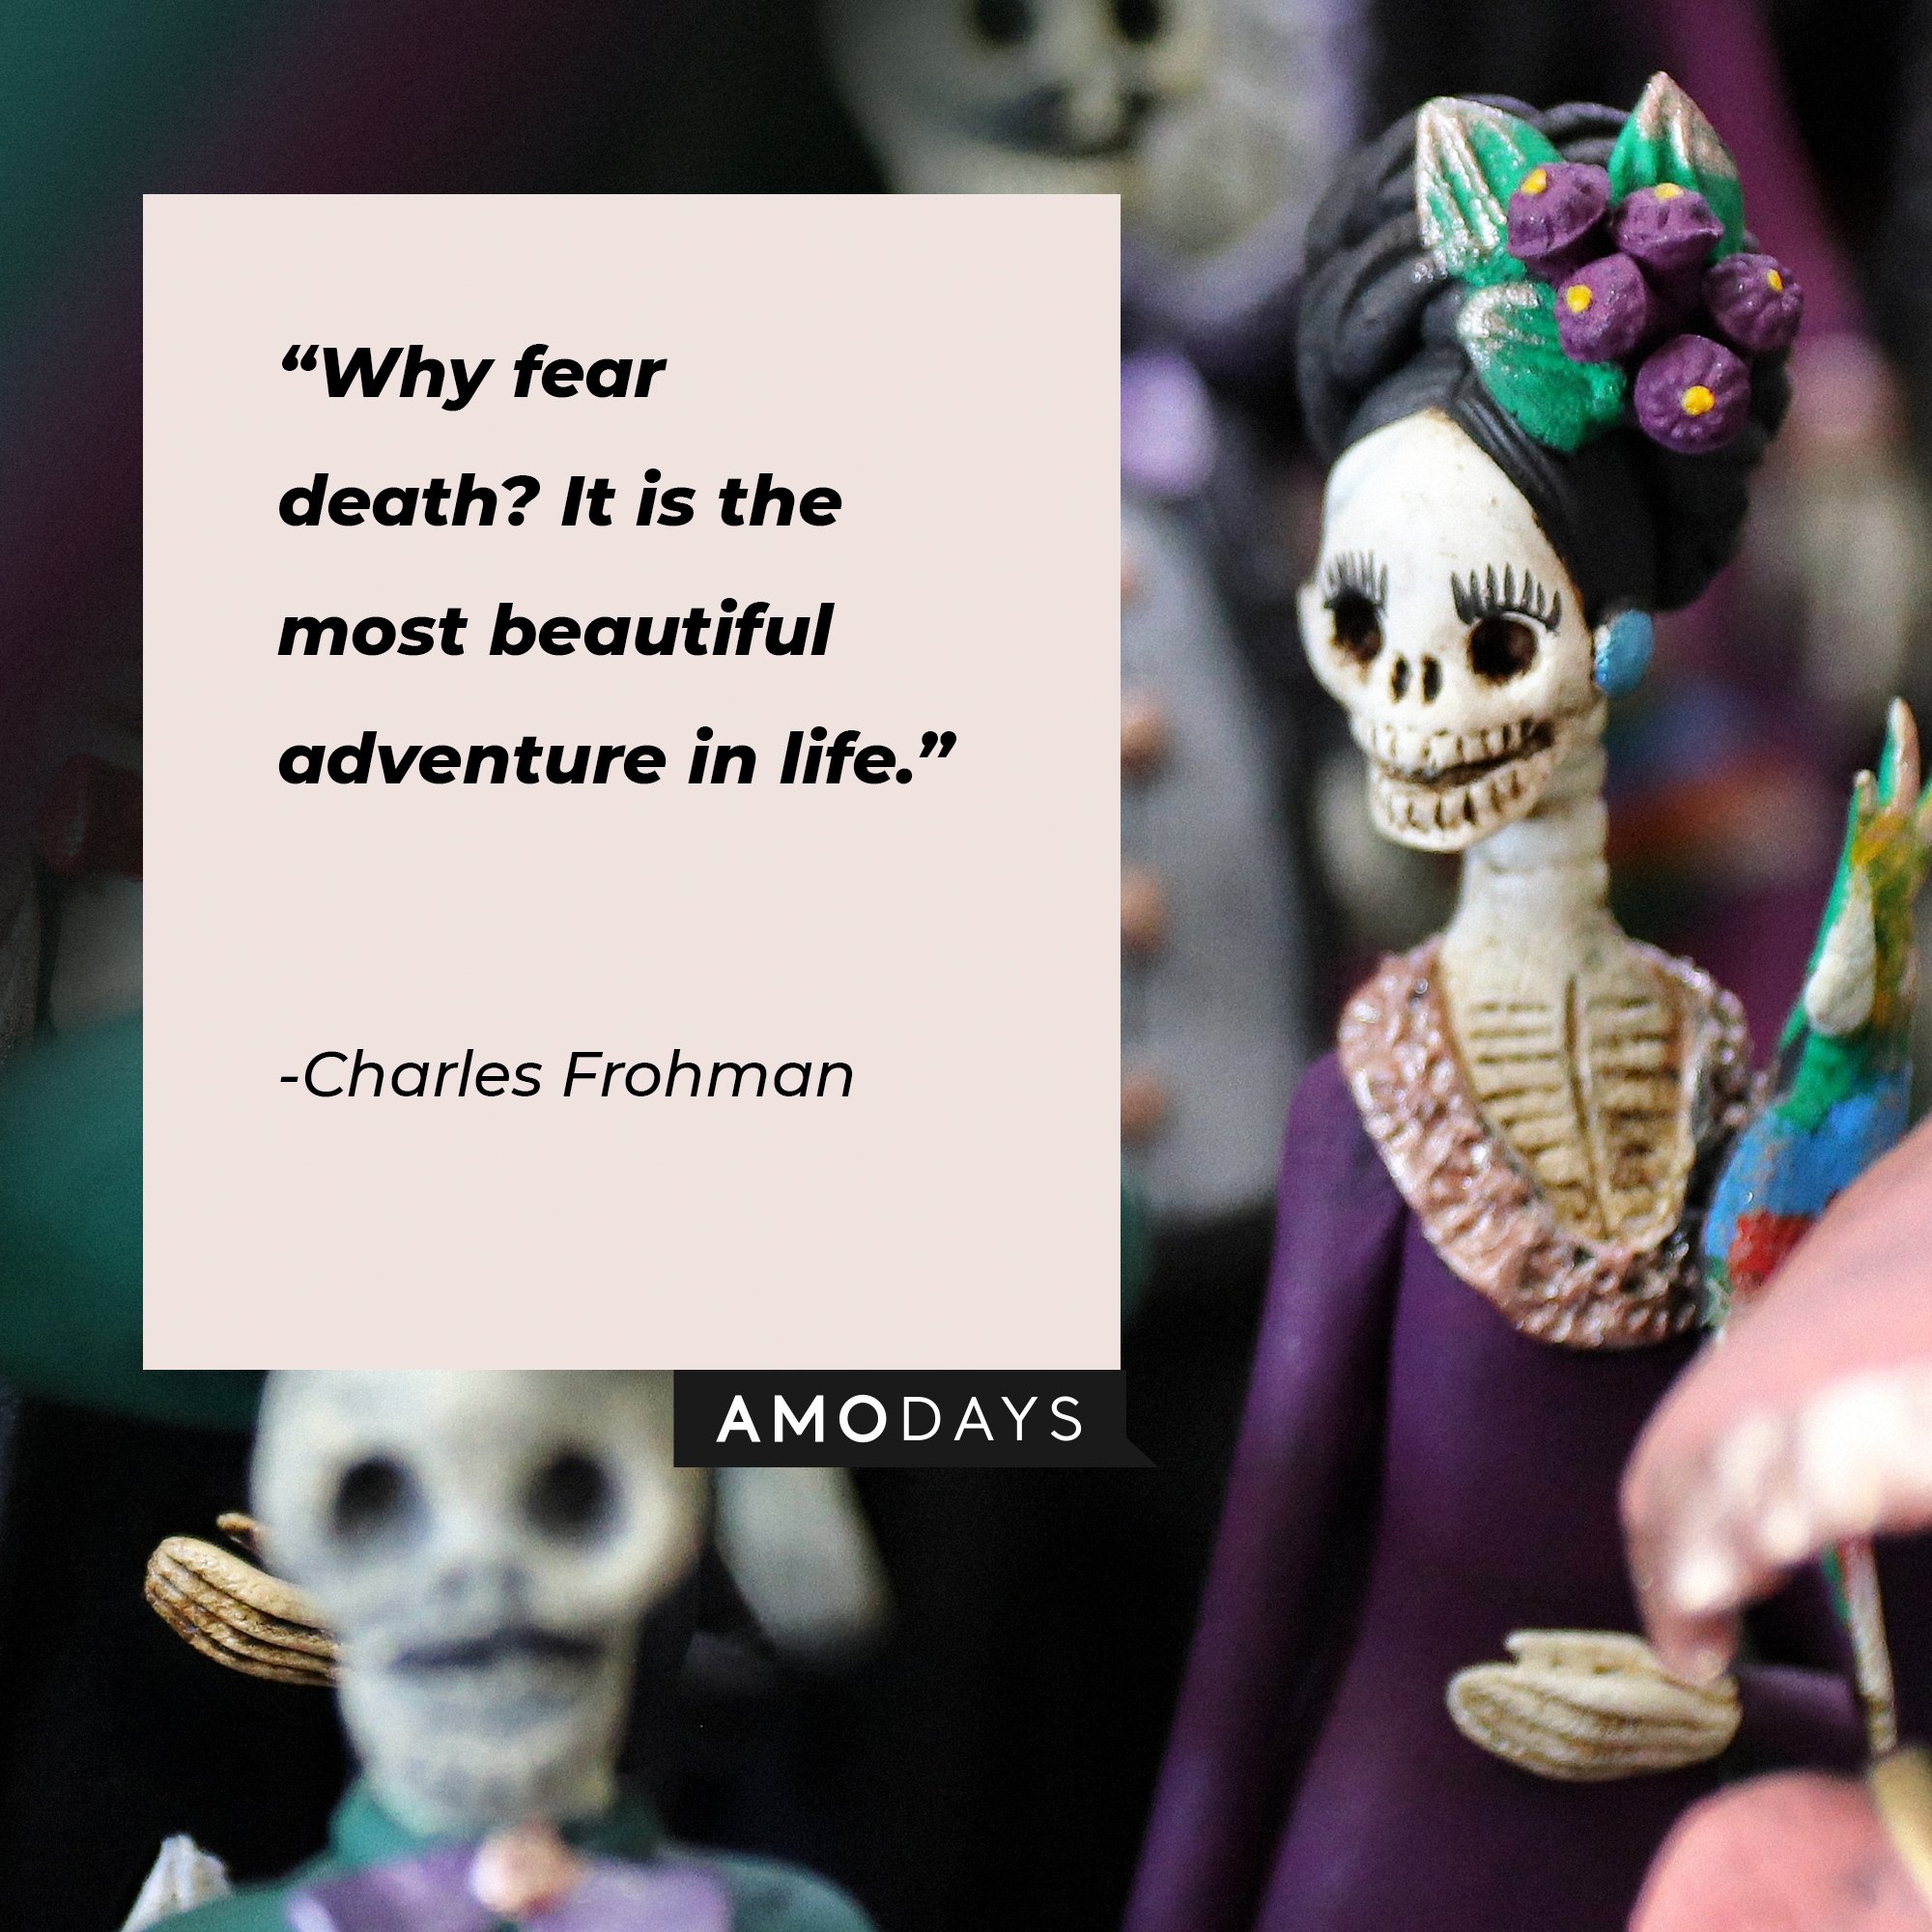  Charles Frohman’s quote: "Why fear death? It is the most beautiful adventure in life." | Image: AmoDays 